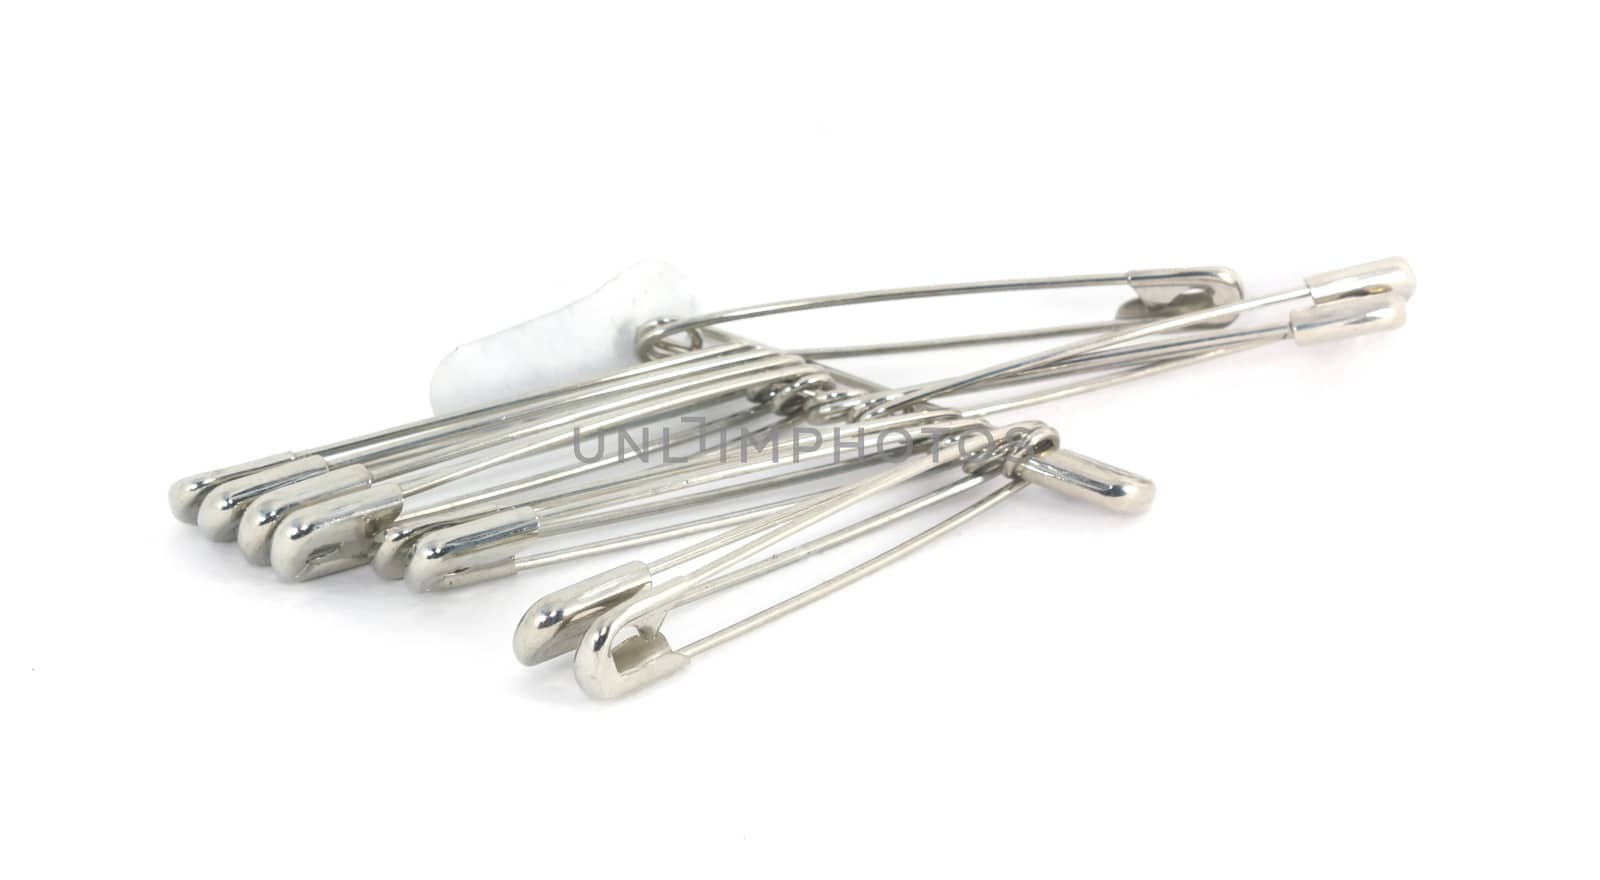 Bunch of safety pins by dontpoke